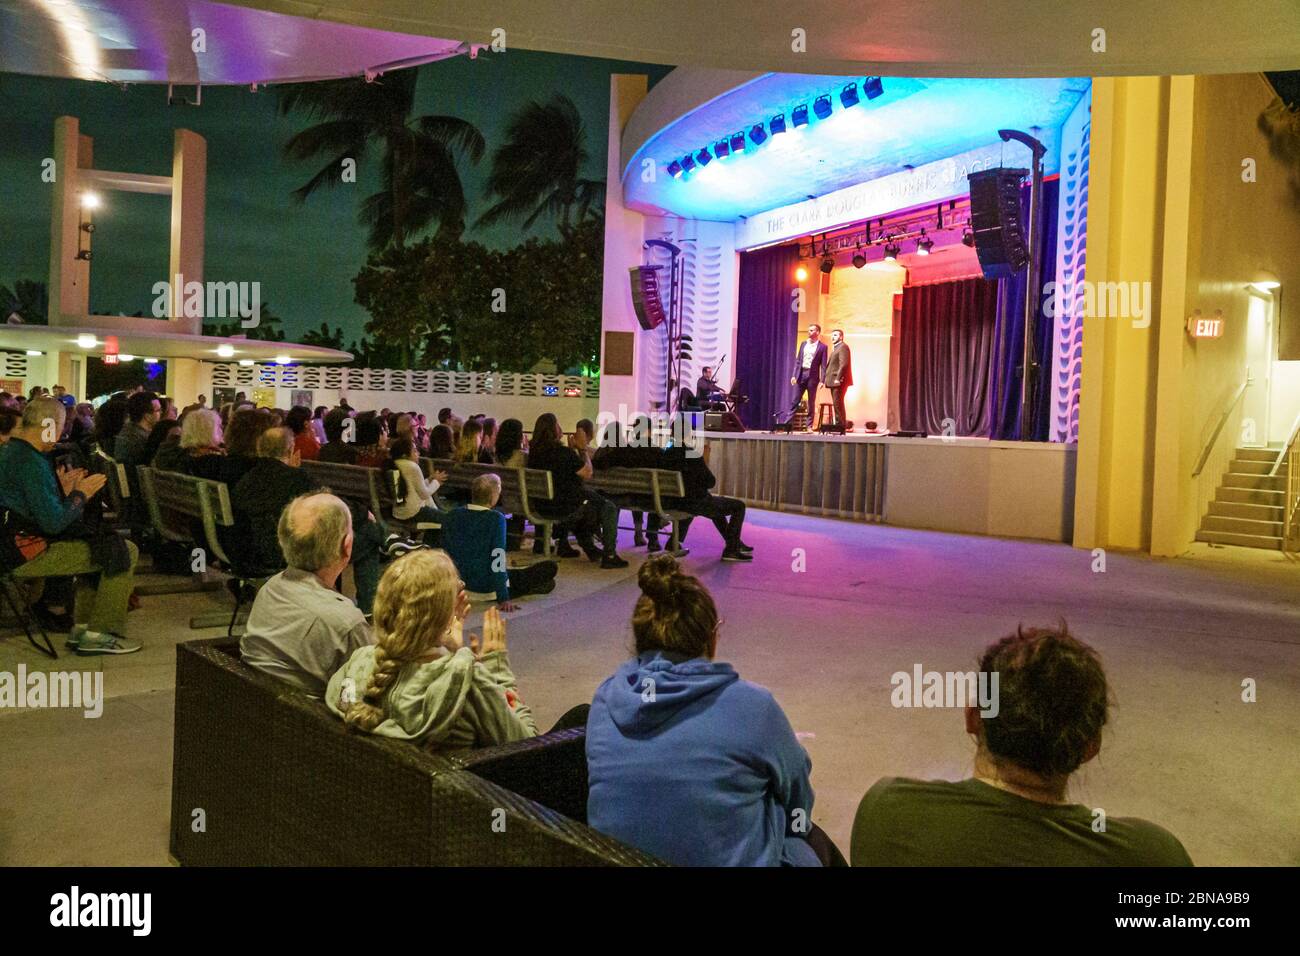 Miami Beach Florida,North Beach Band Shell audience,night night nightlife evening after dark,free opera performance,stage,singer performer performing, Stock Photo